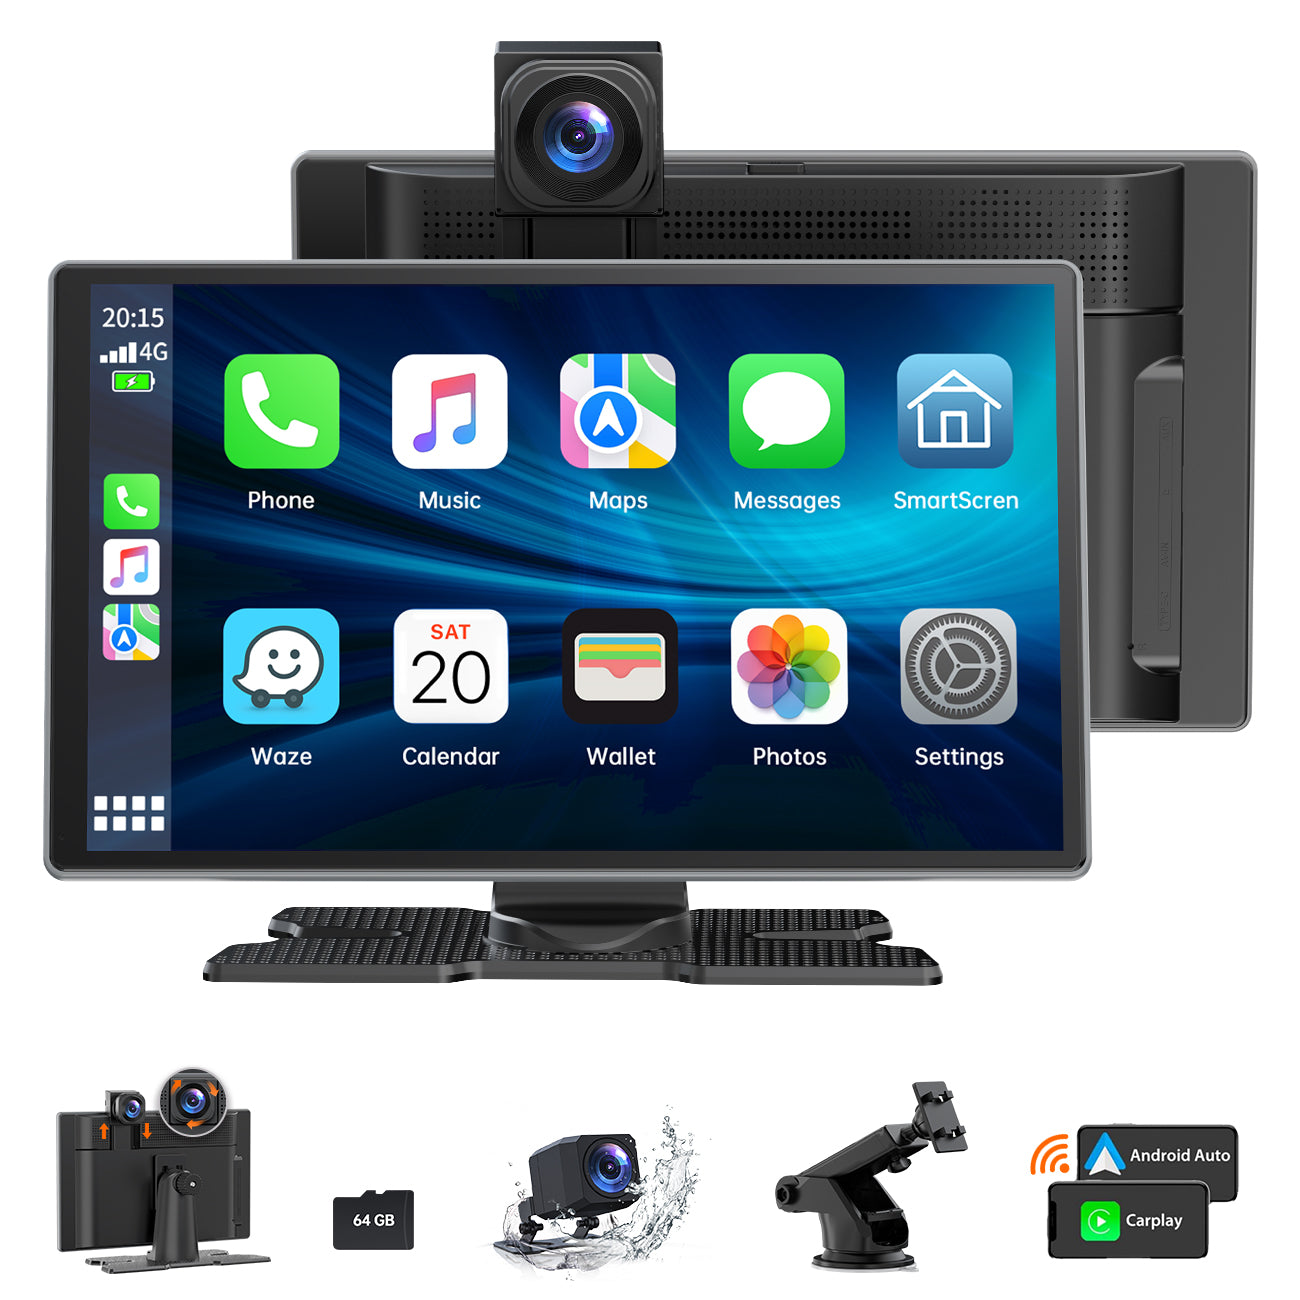 LAMTTO 9 Inch Wireless Car Stereo with Apple Carplay & 1080P Reverse Camera,Portable Touch Screen Car Play GPS Navigation for Car,Car Audio Receivers with Mirror Link, Android Auto, Bluetooth,FM, Siri